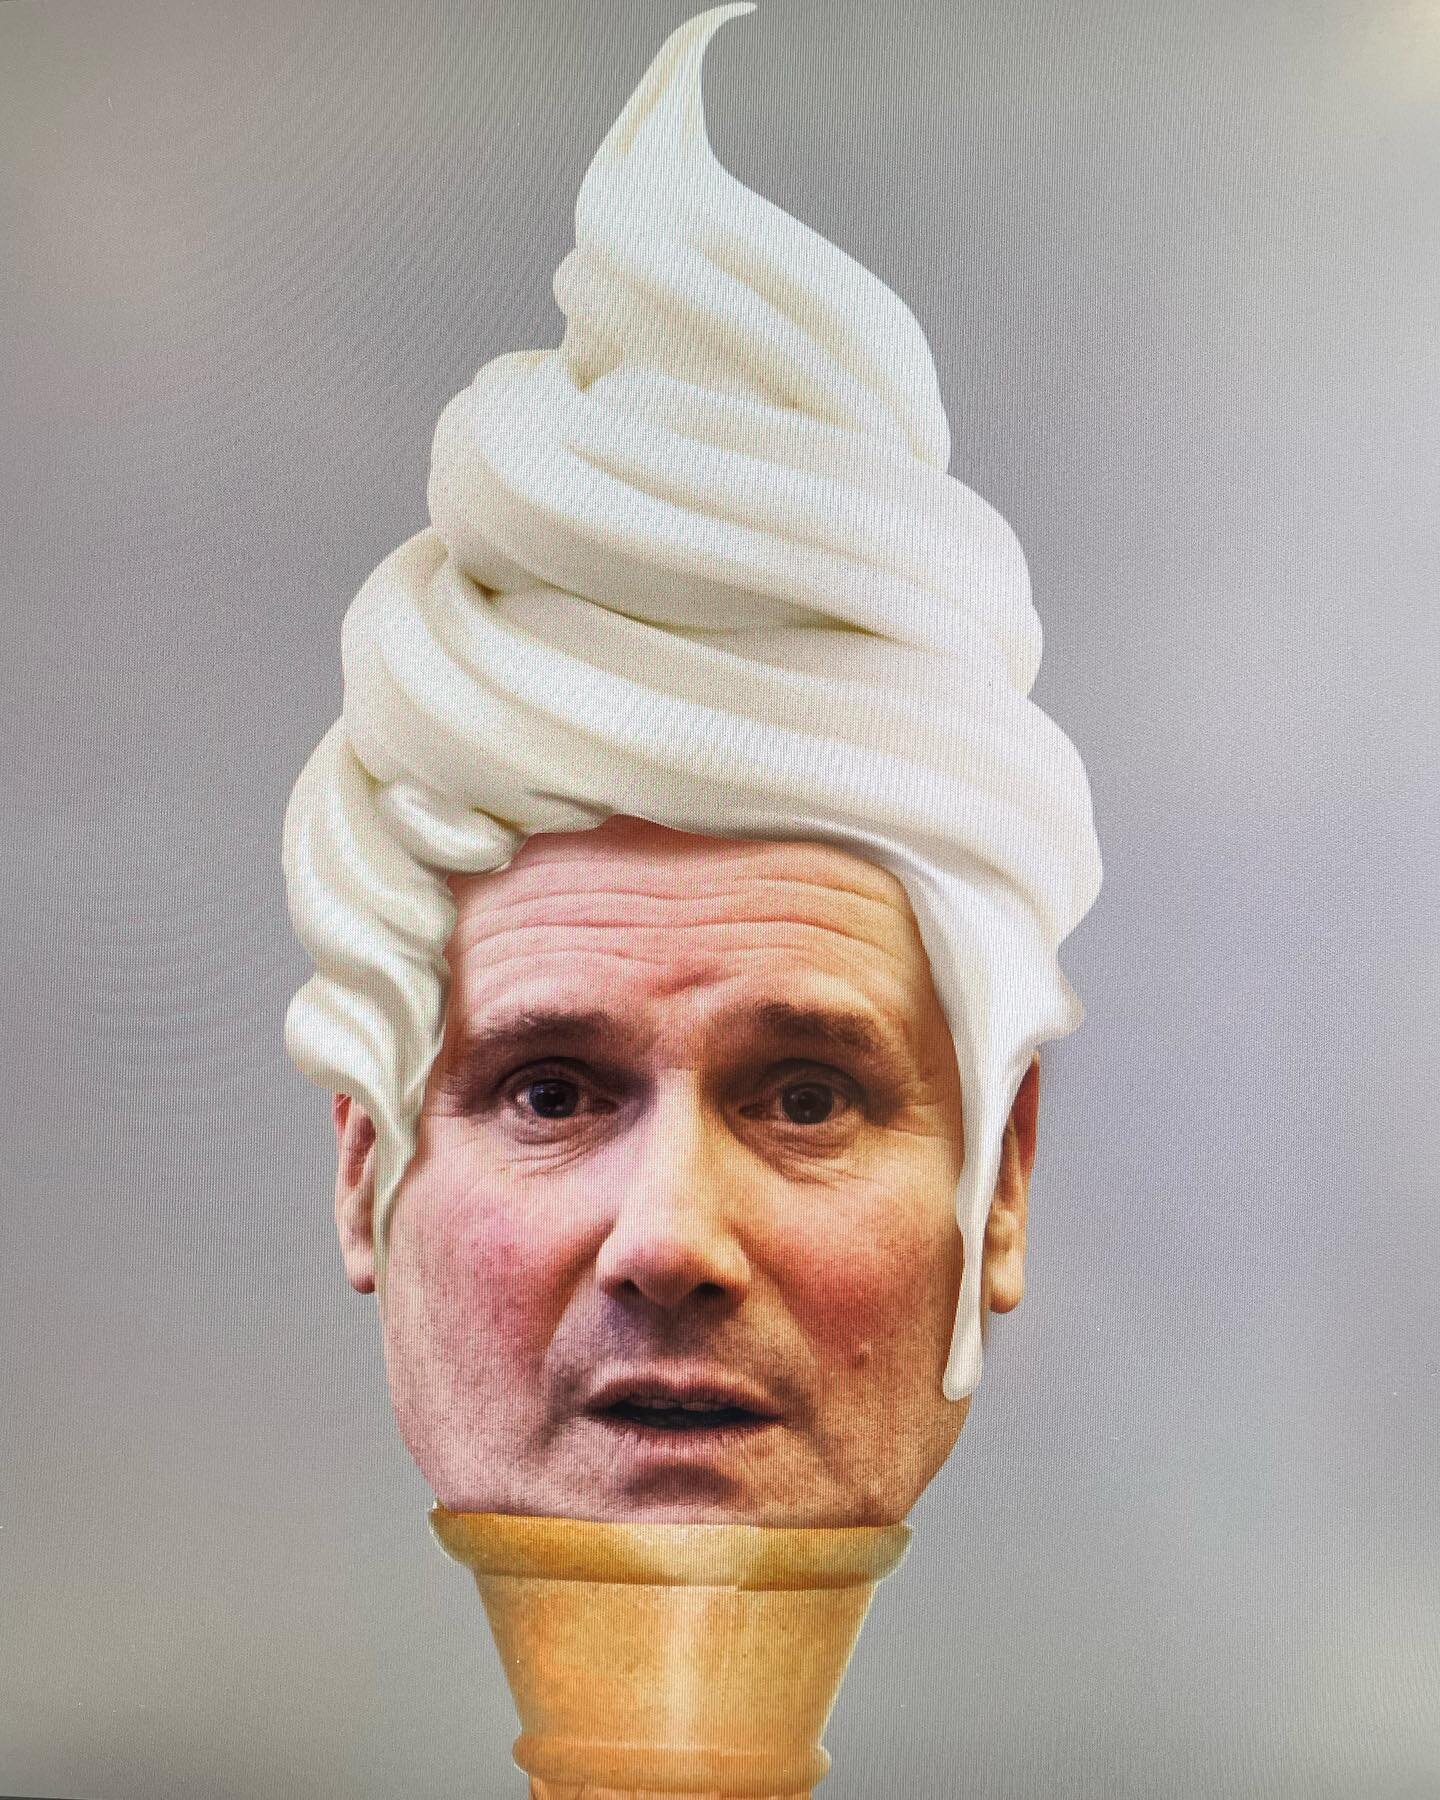 The double scoop version of my Keir Starmer as a Mr softie ice-cream (don&rsquo;t ask) made its way on to Have I Got News for You